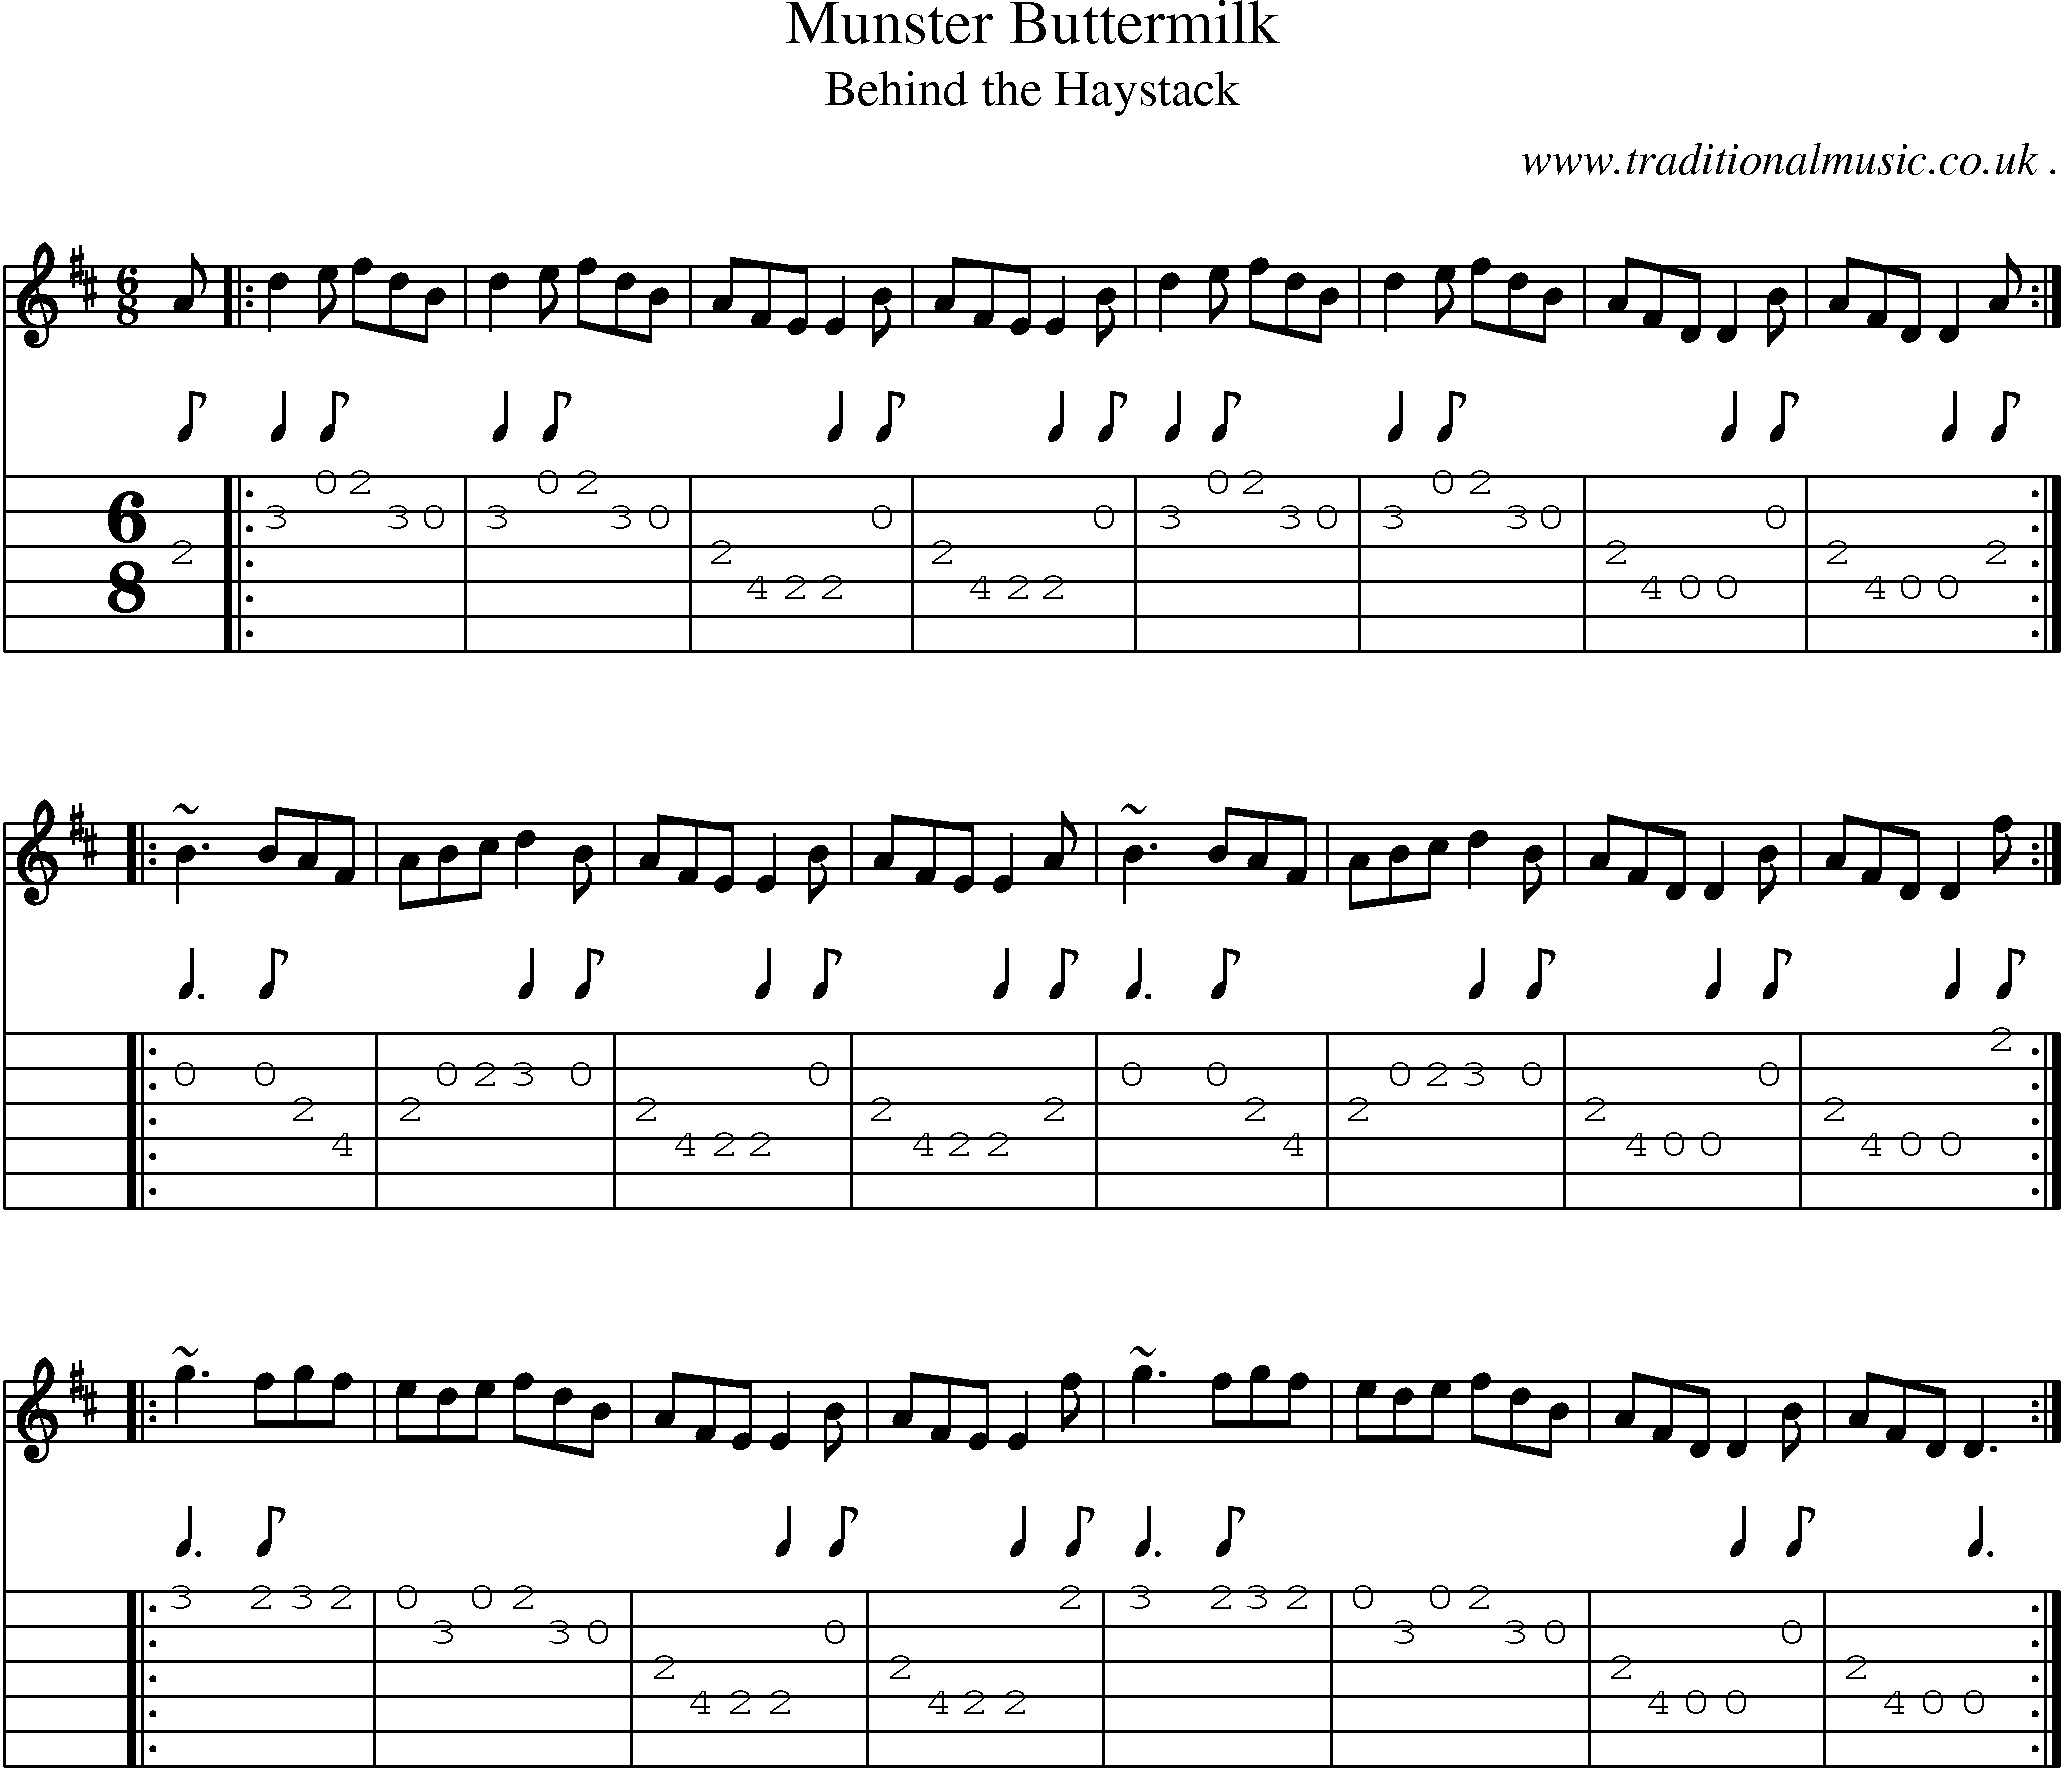 Sheet-music  score, Chords and Guitar Tabs for Munster Buttermilk